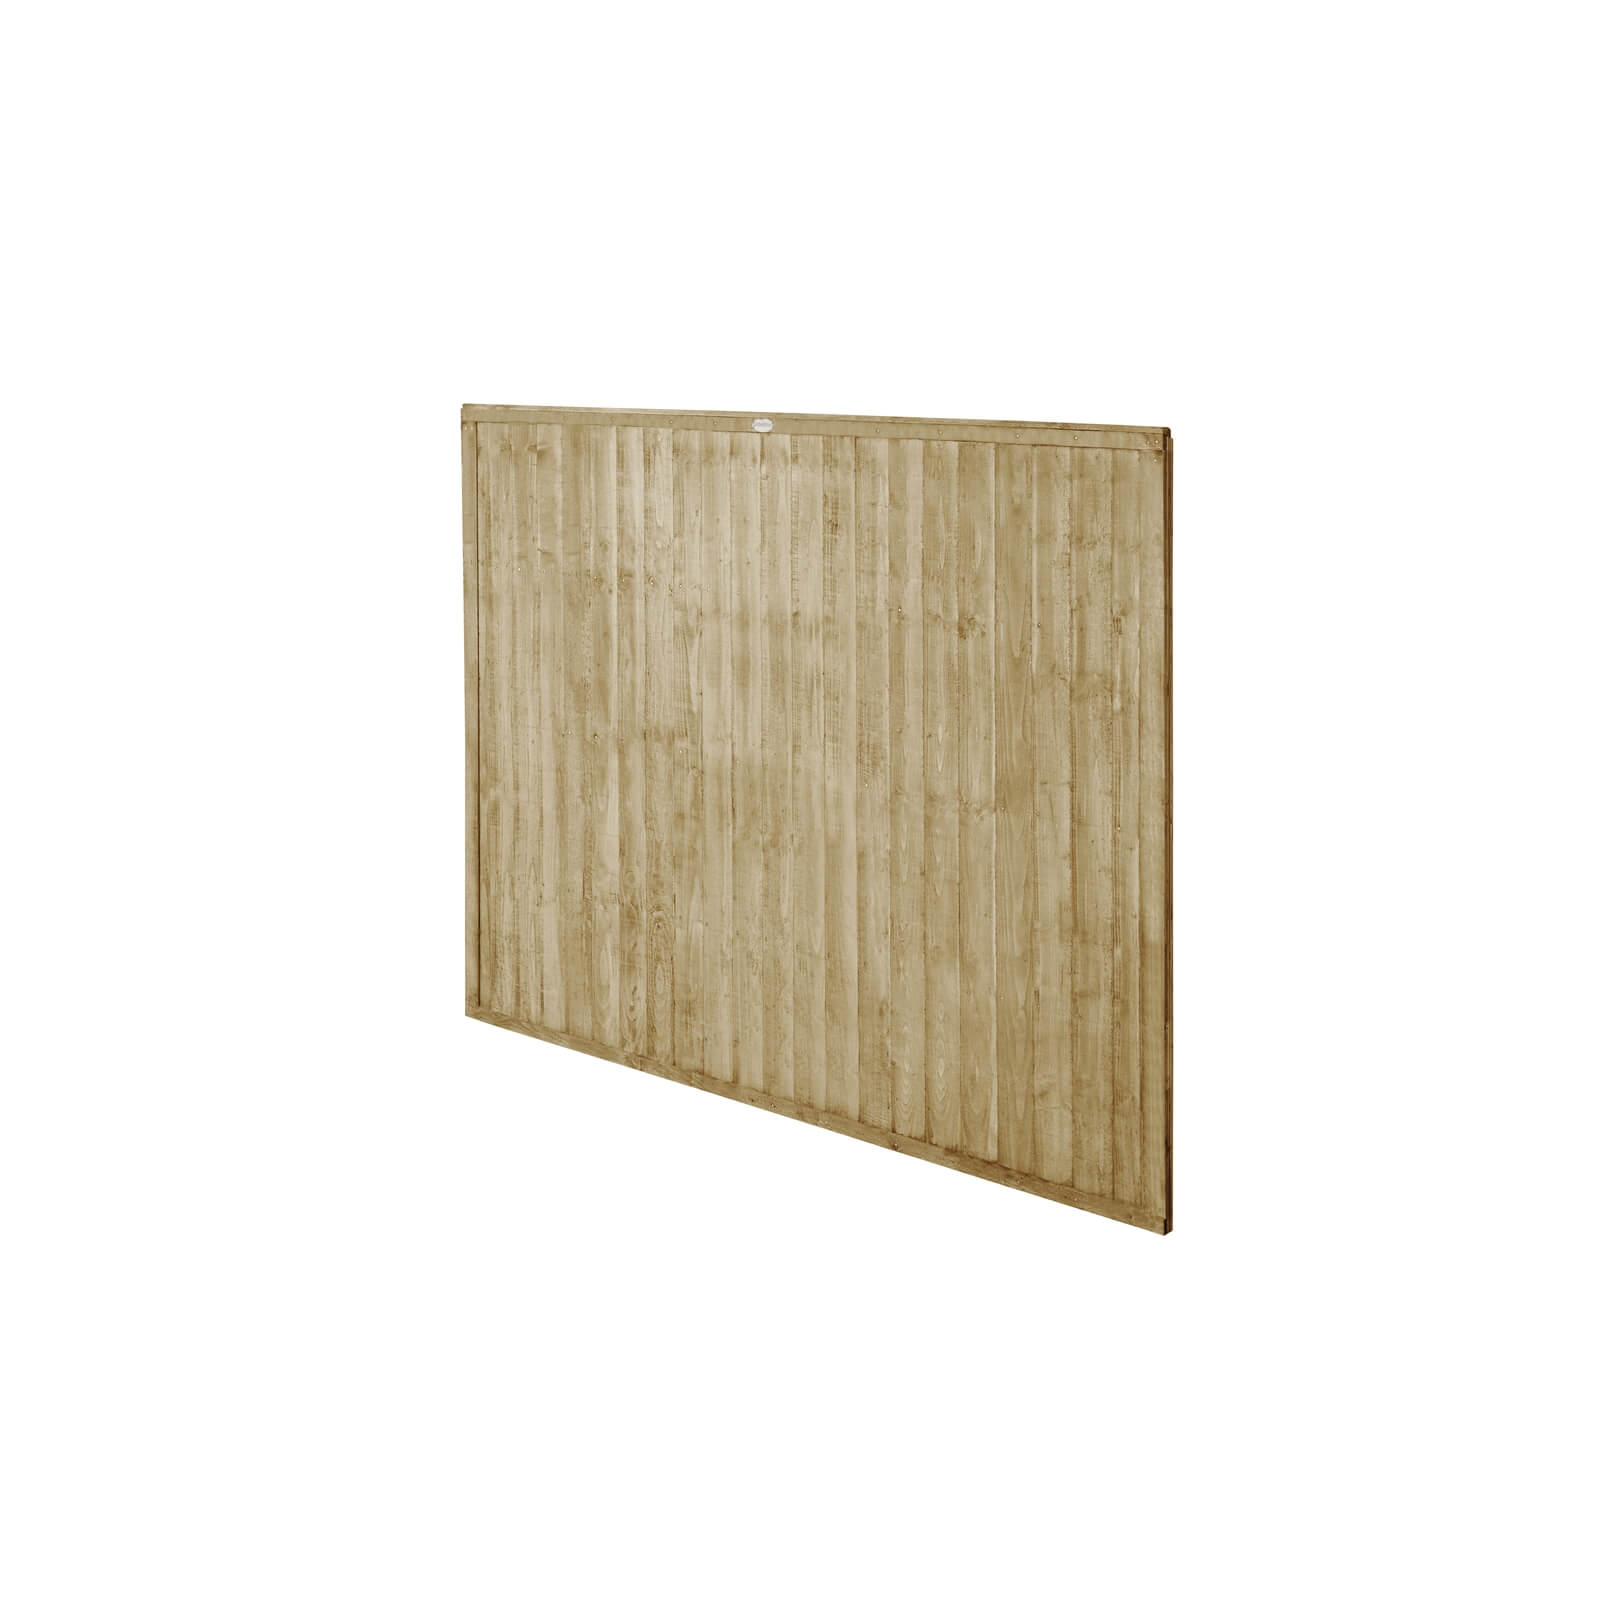 6ft x 5ft (1.83m x 1.52m) Pressure Treated Closeboard Fence Panel - Pack of 20